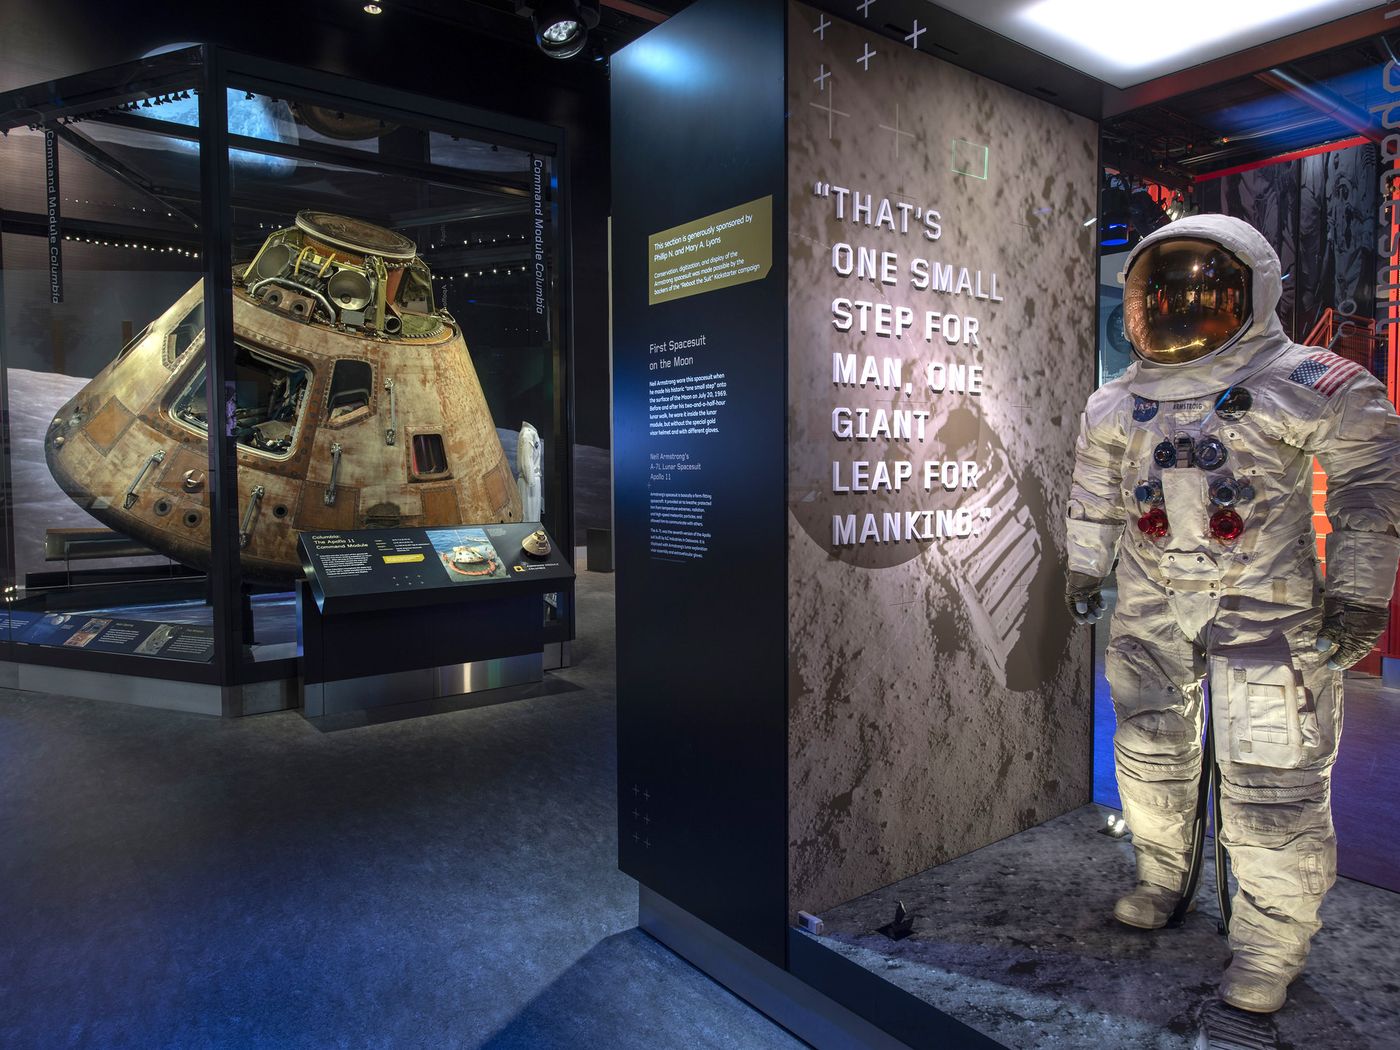 Apollo 11 space suit and command module